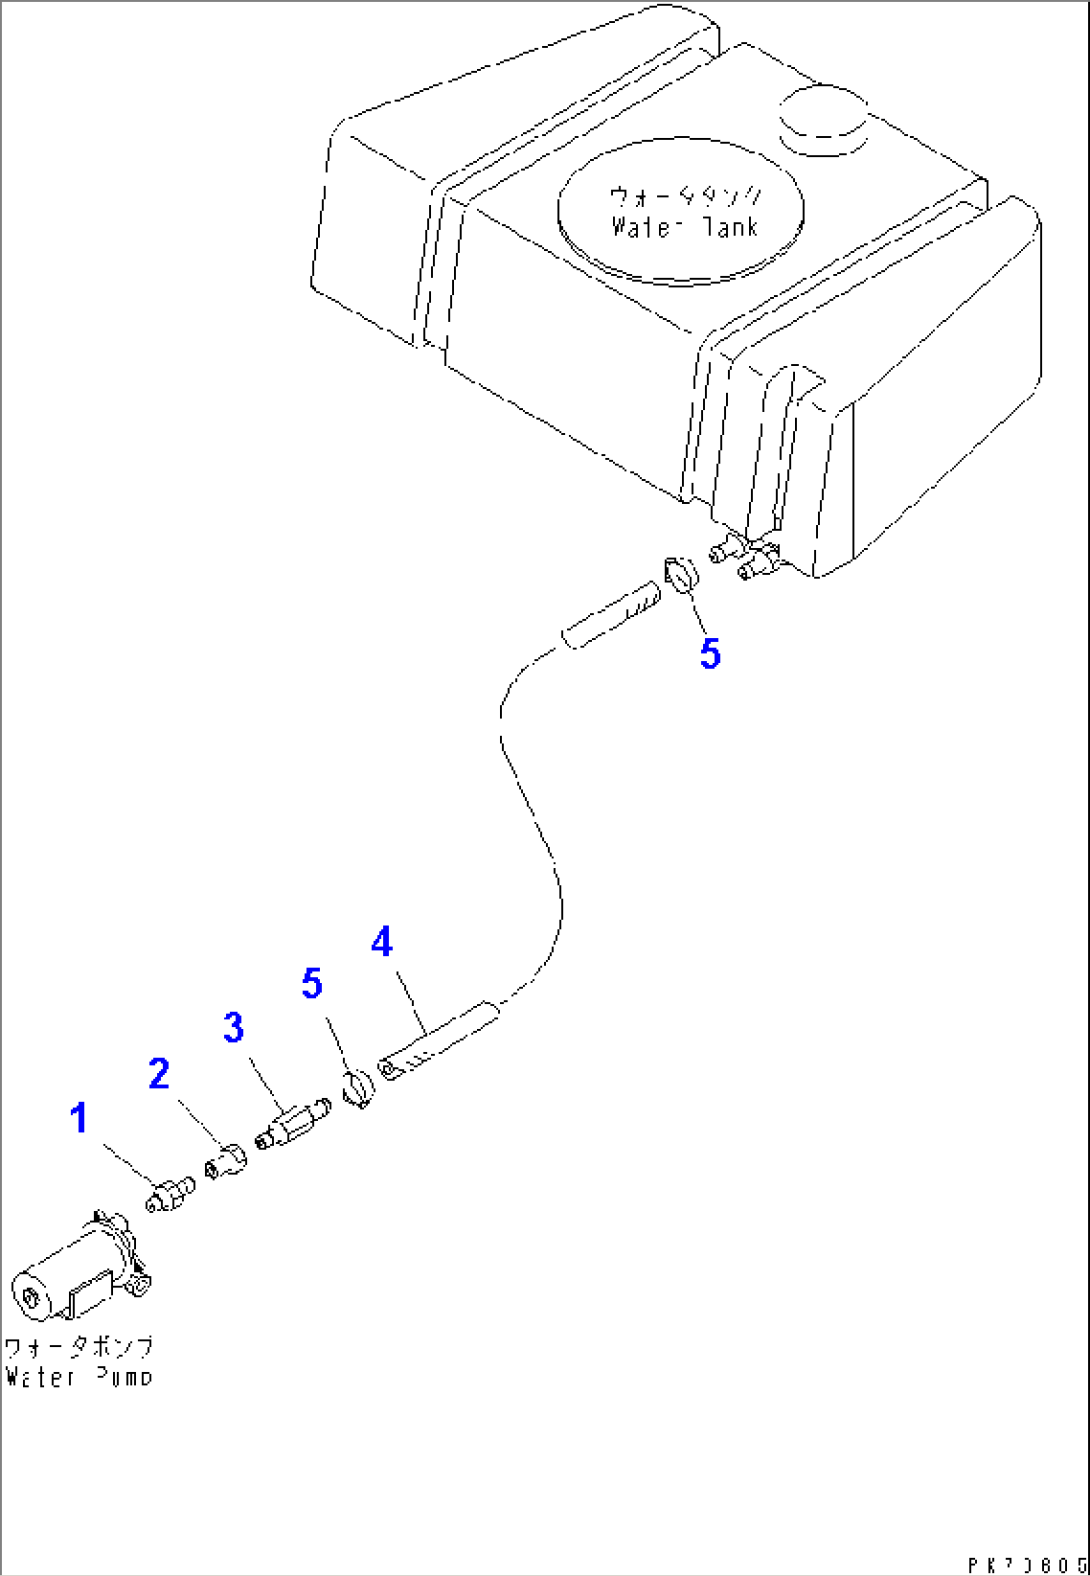 WATER PIPING (5/5) (DRAIN LINE)